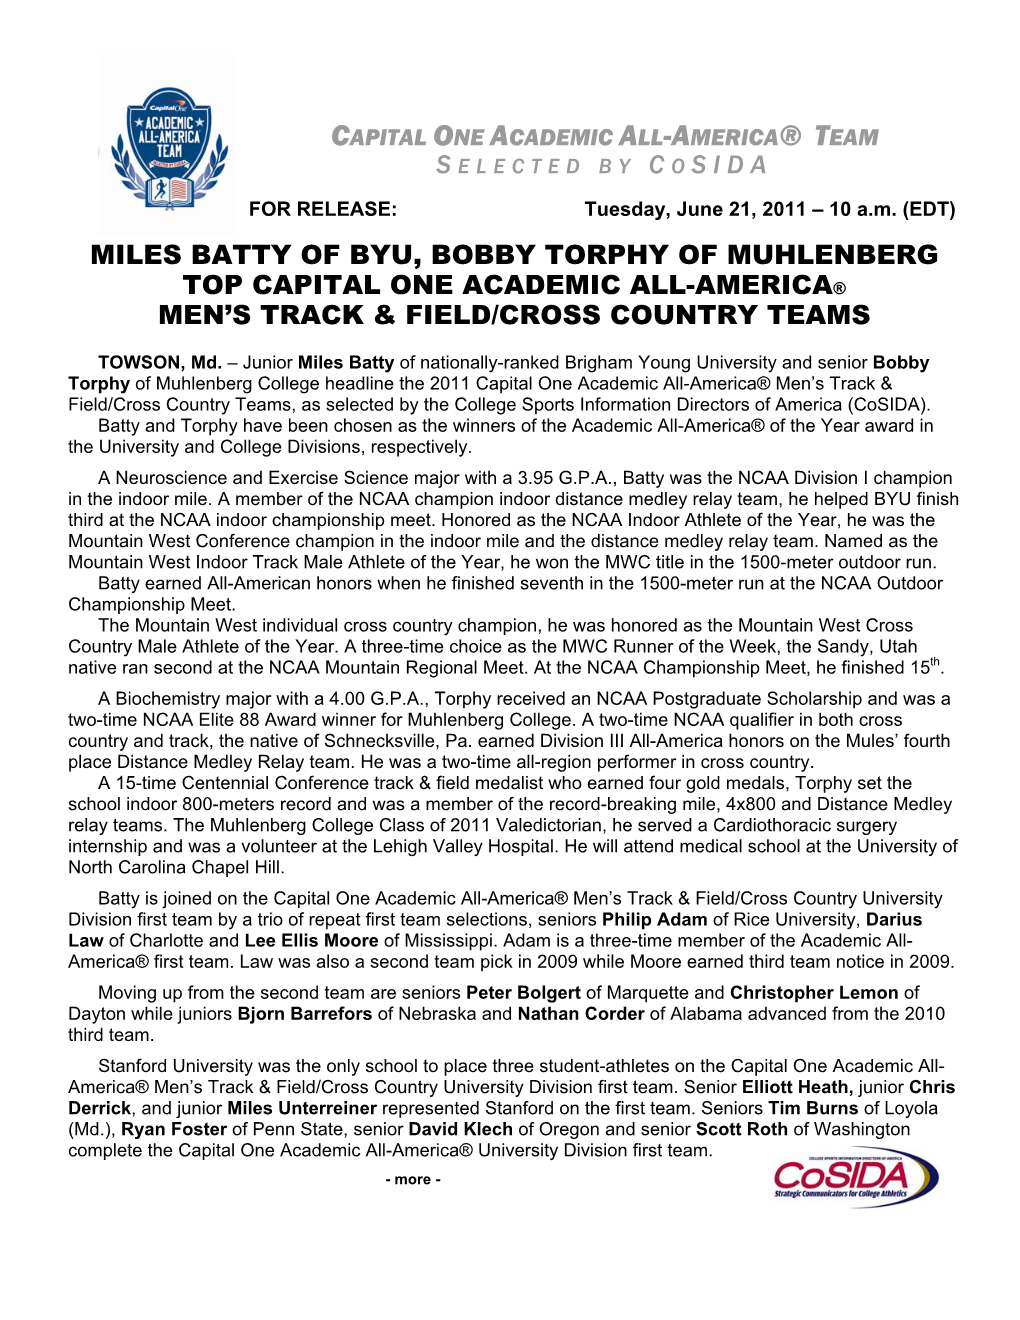 Miles Batty of Byu, Bobby Torphy of Muhlenberg Top Capital One Academic All-America® Men’S Track & Field/Cross Country Teams